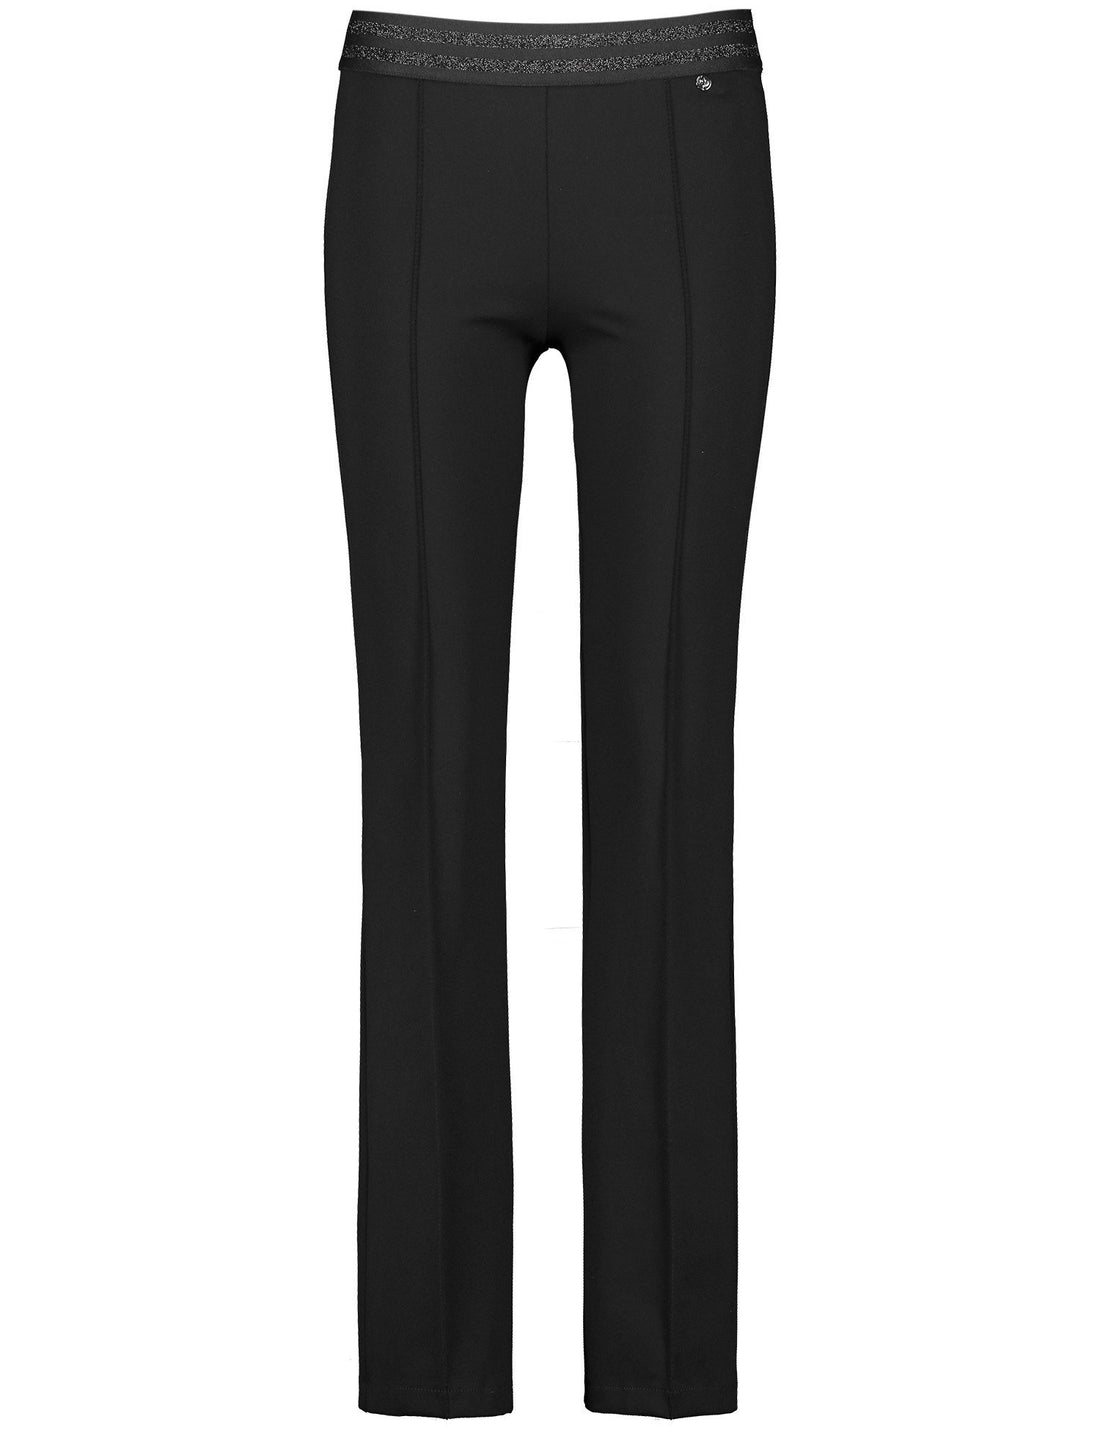 Flared Stretch Trousers In A Slim Fit With An Elasticated Waistband And Added Lurex_122100-67802_11000_02